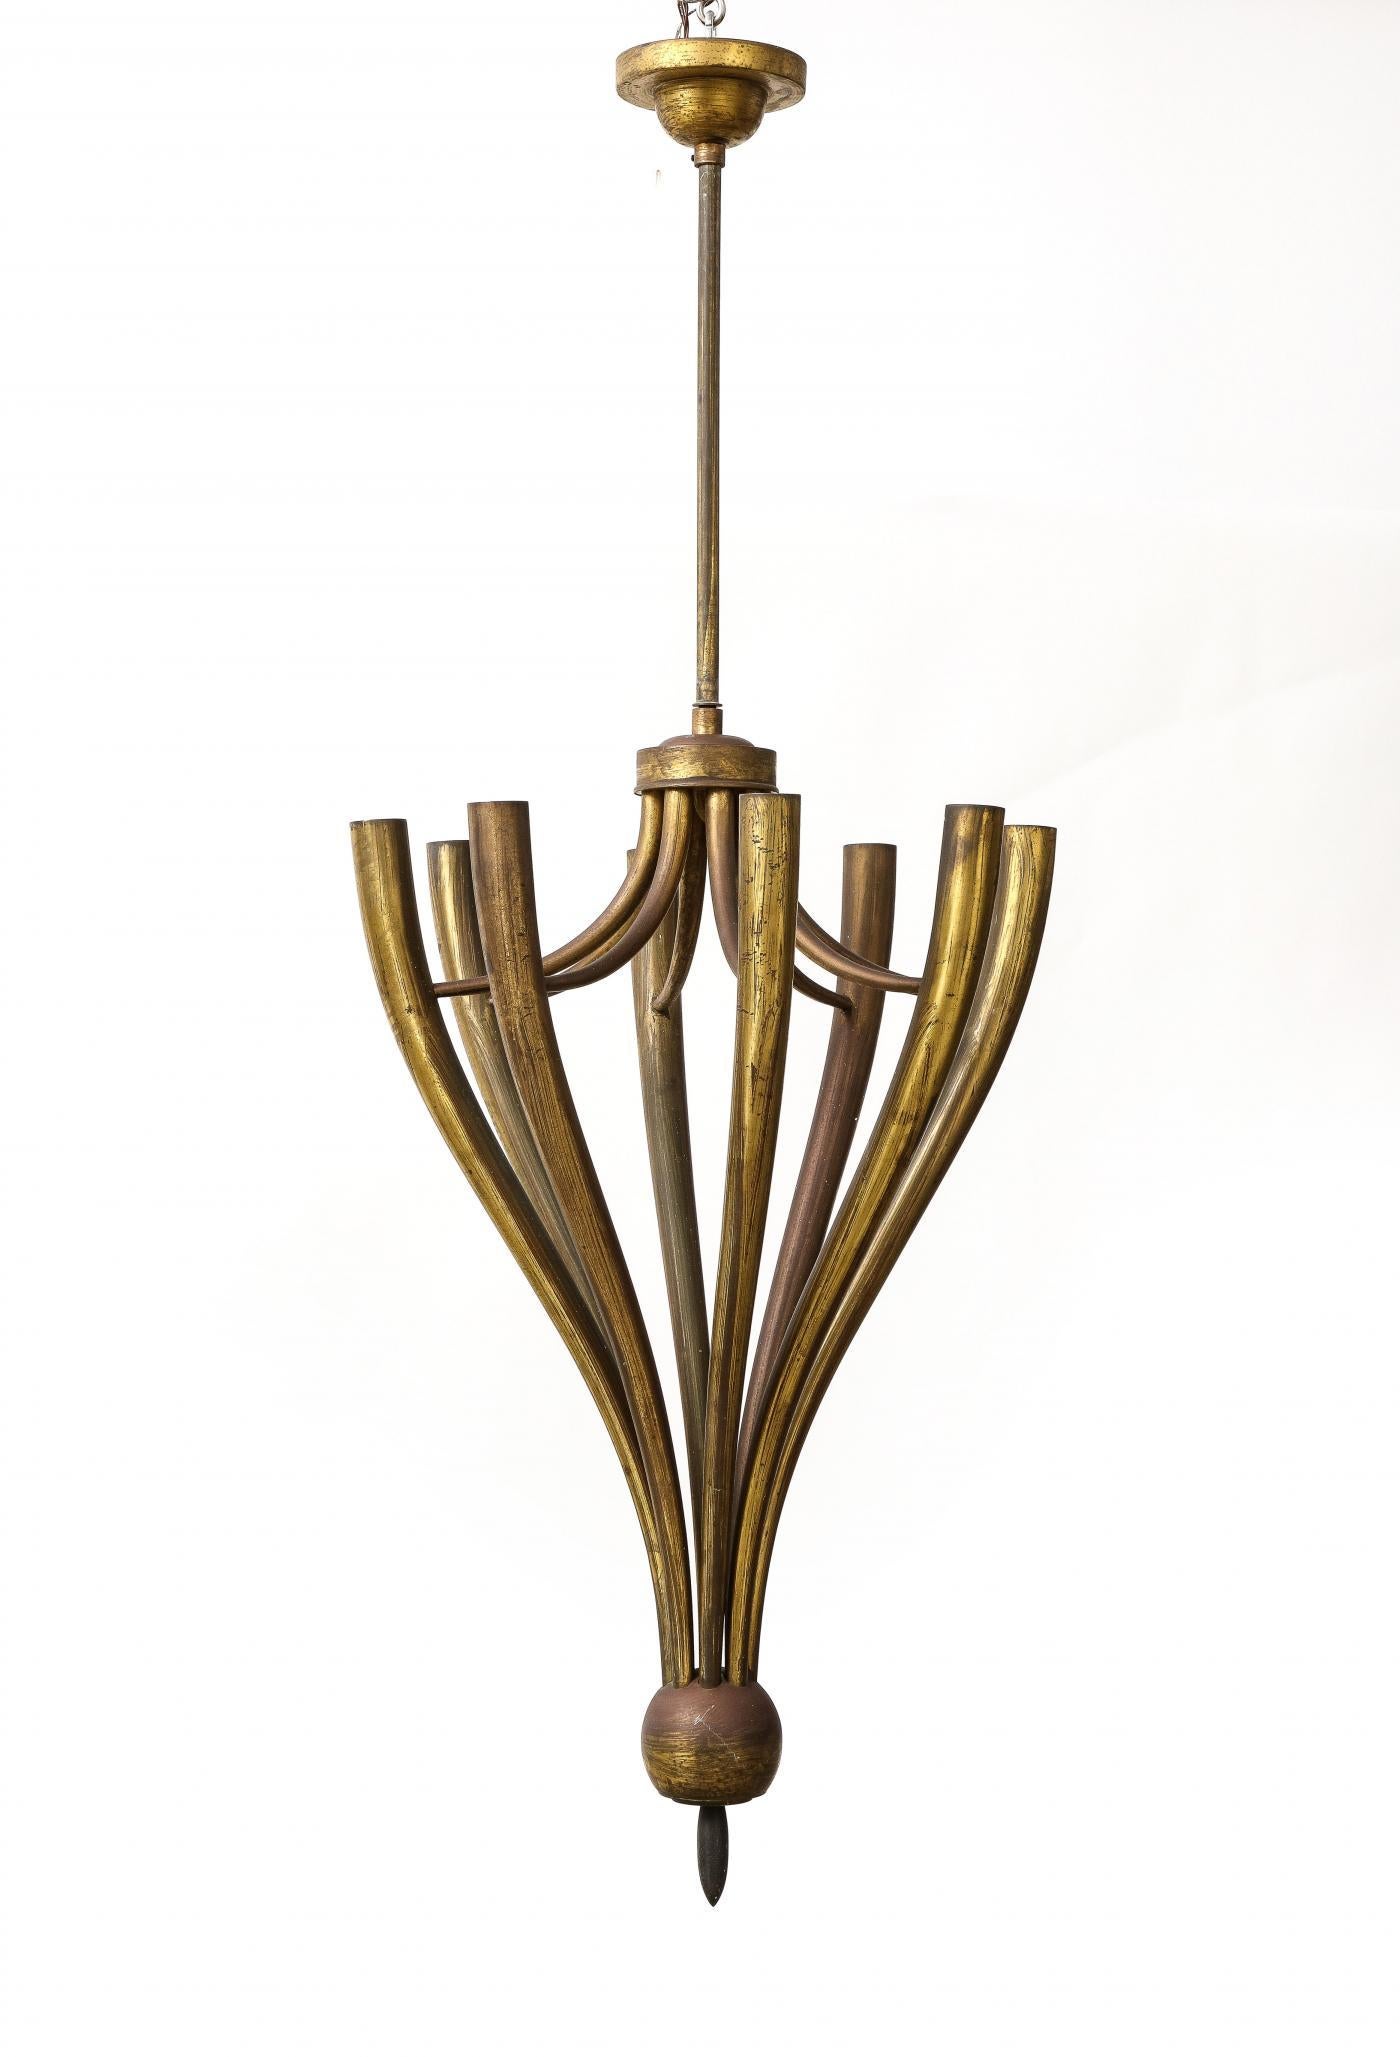 Italian Eight-Arm Patinated Brass Chandelier by Guglielmo Ulrich, Italy, c. 1950 For Sale